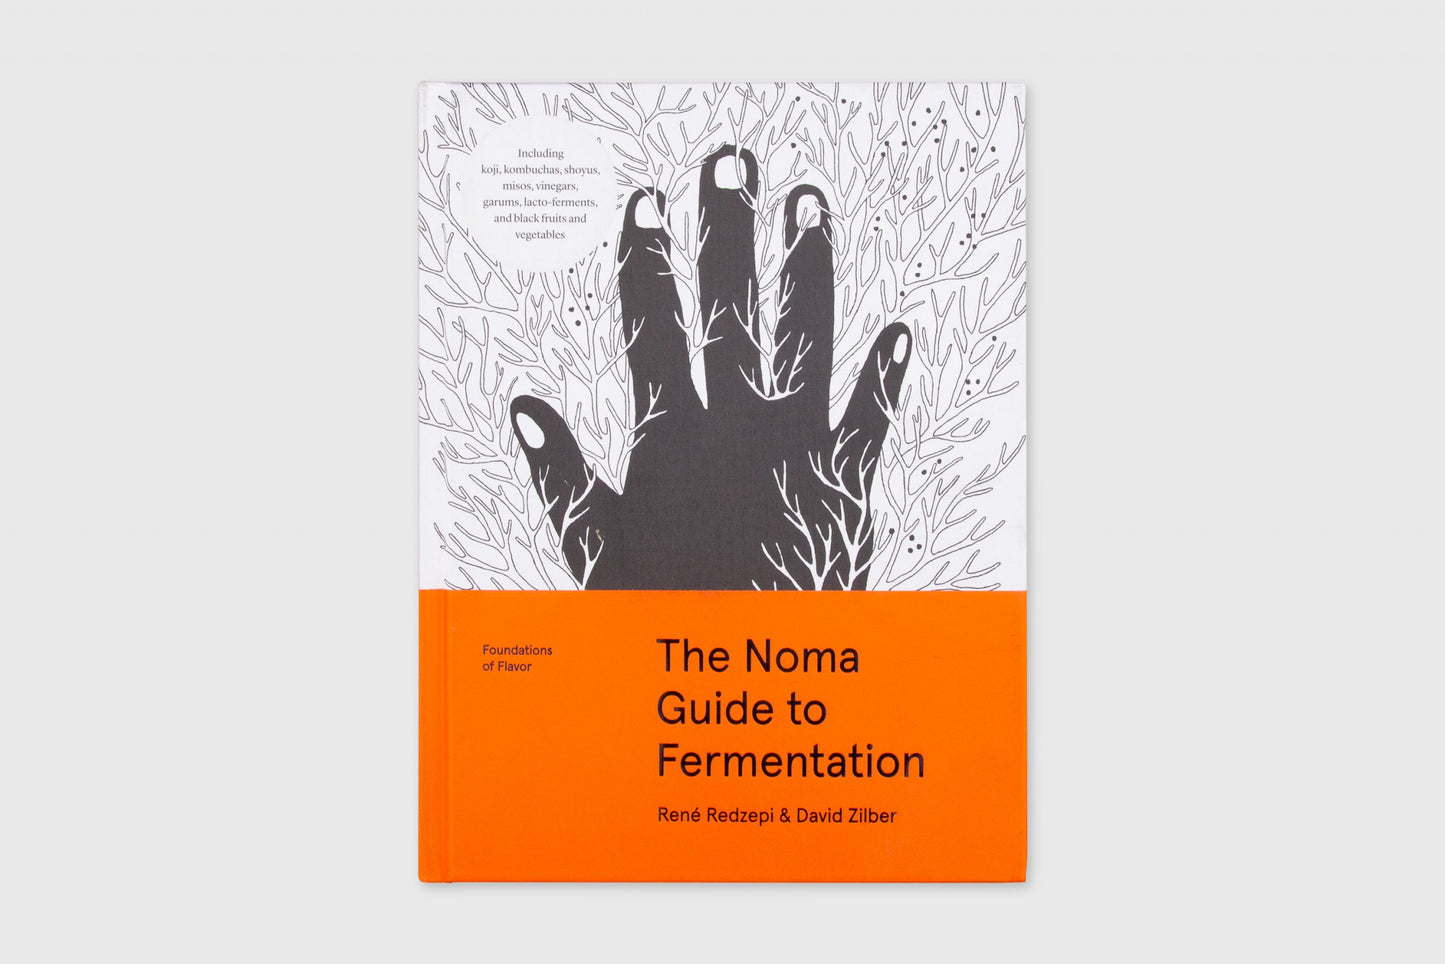 The Noma Guide to Fermentation